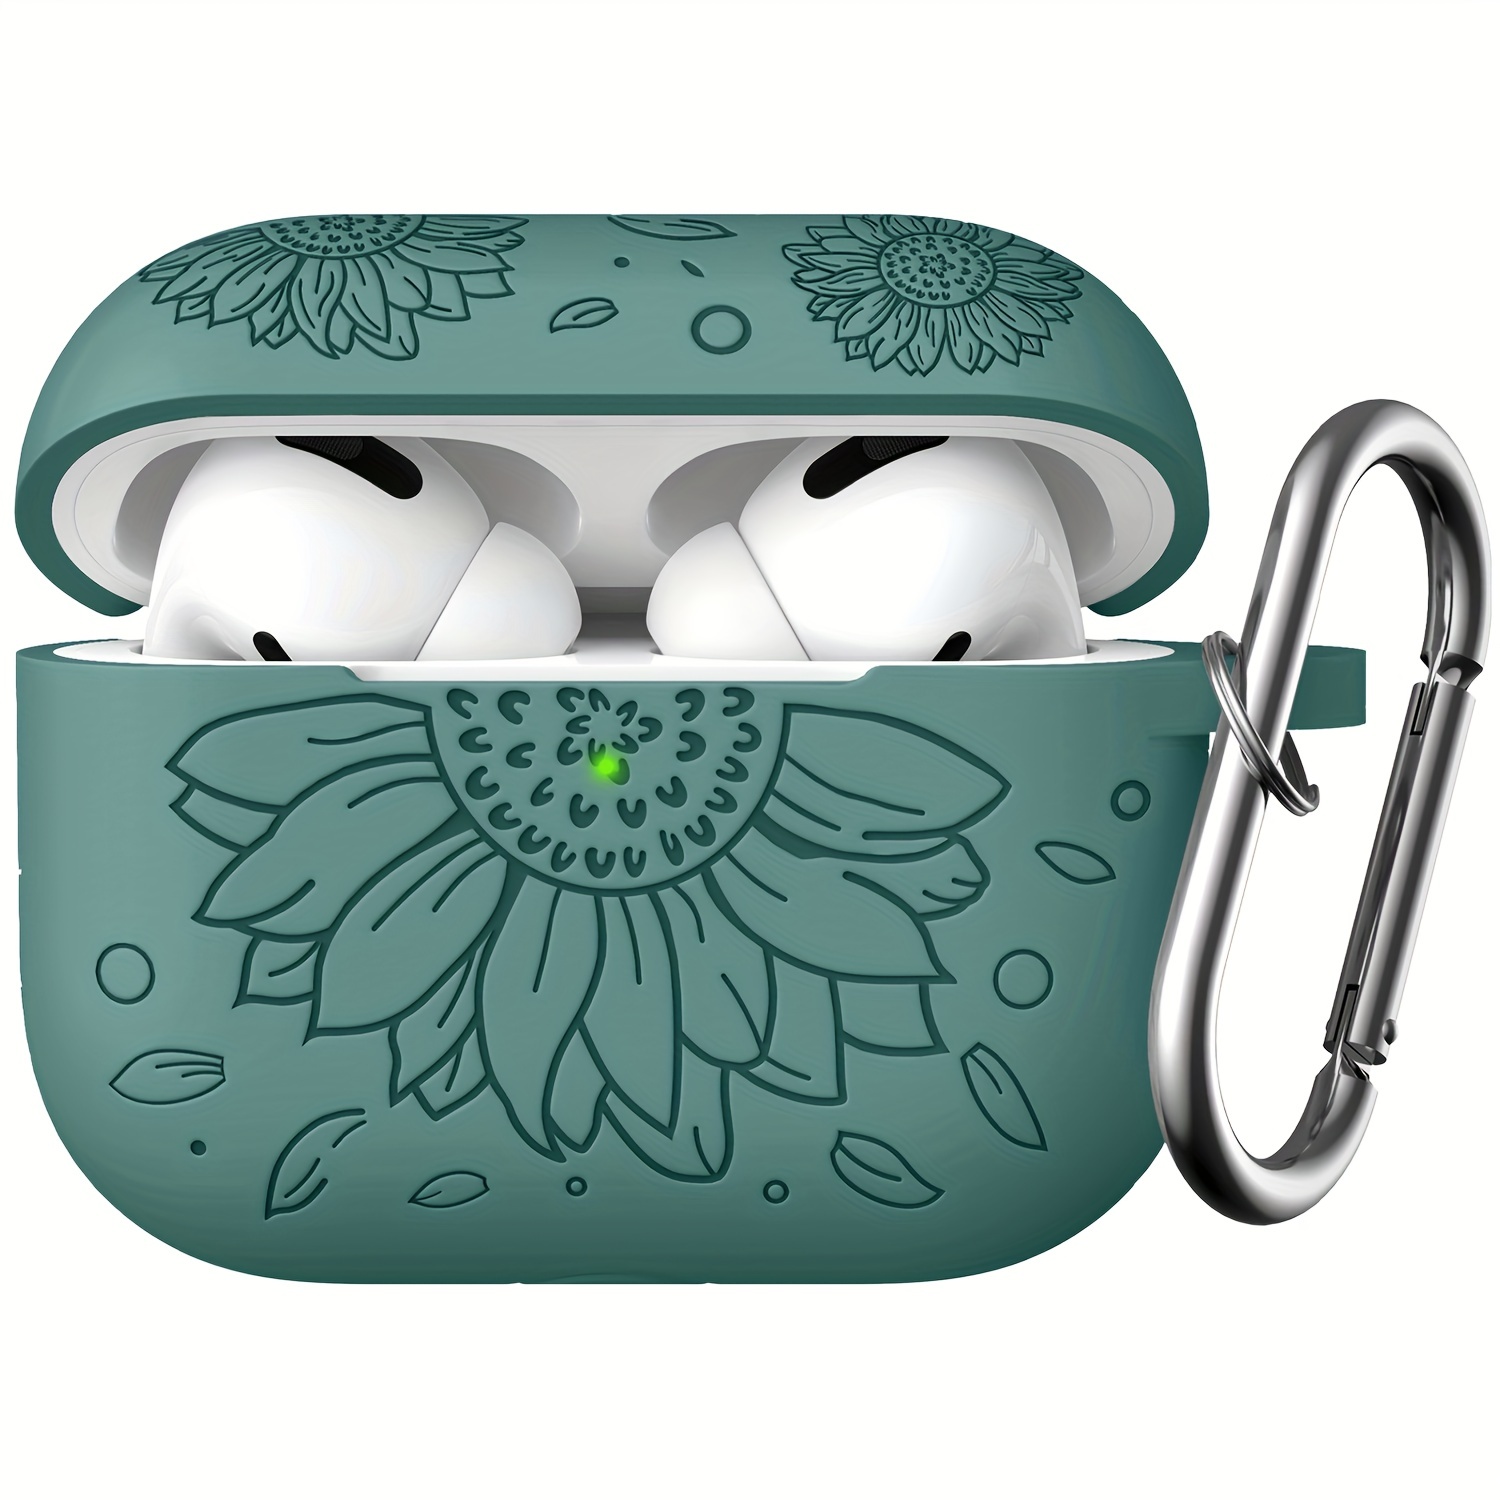  Cute Airpod Pro Case Smile Sun Flower Bracelet Design Soft  Silicone Clear Glitter Protective Cover for Airpods Pro Case : Electronics